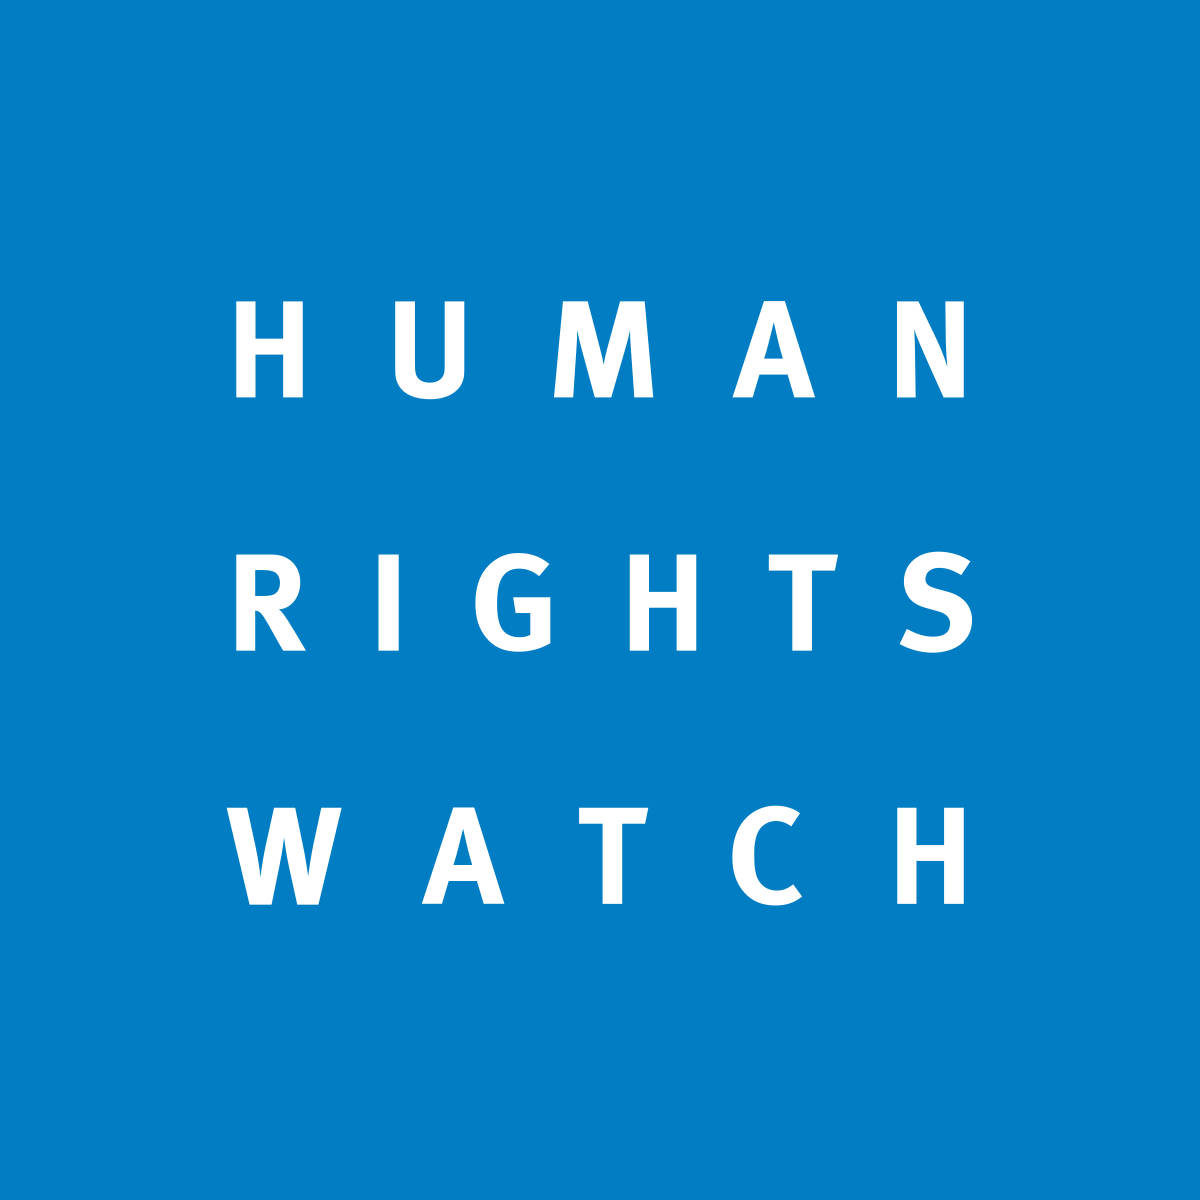 The Digital Division of Human Rights Watch is seeking an experienced Photo Editor